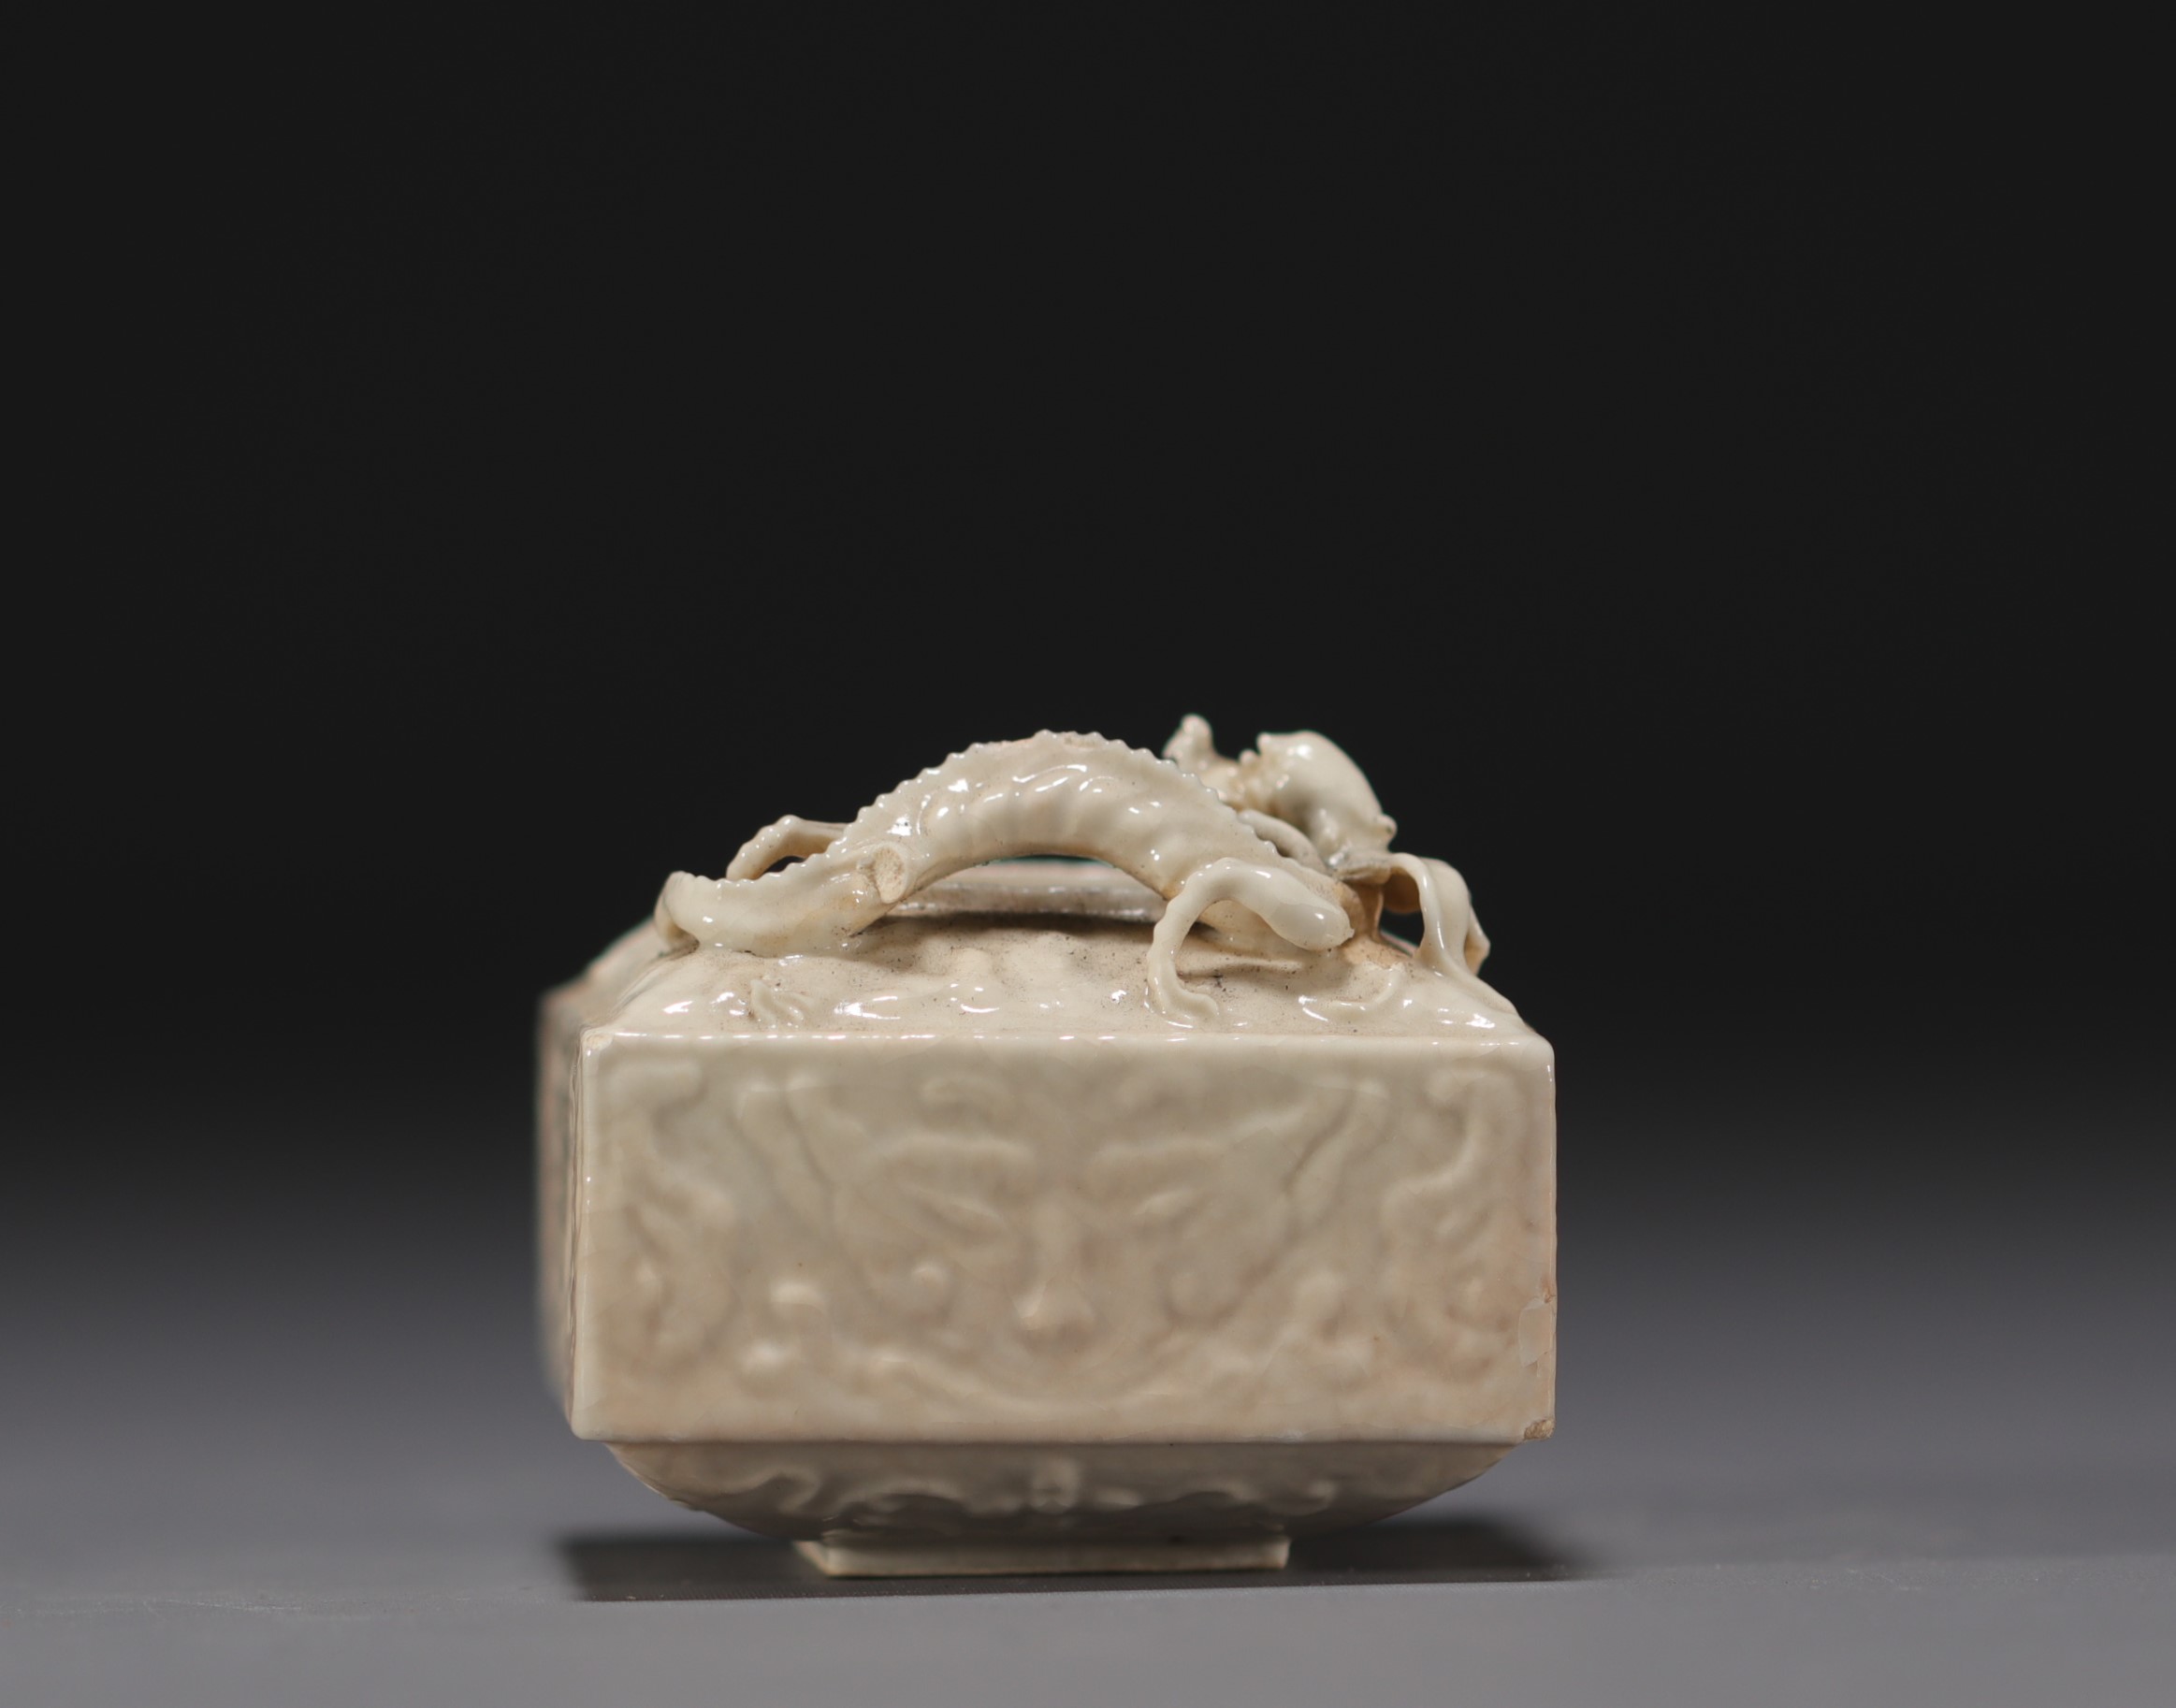 China - "Blanc de Chine" (Dehua porcelain) porcelain inkwell decorated with a dragon. - Image 2 of 5